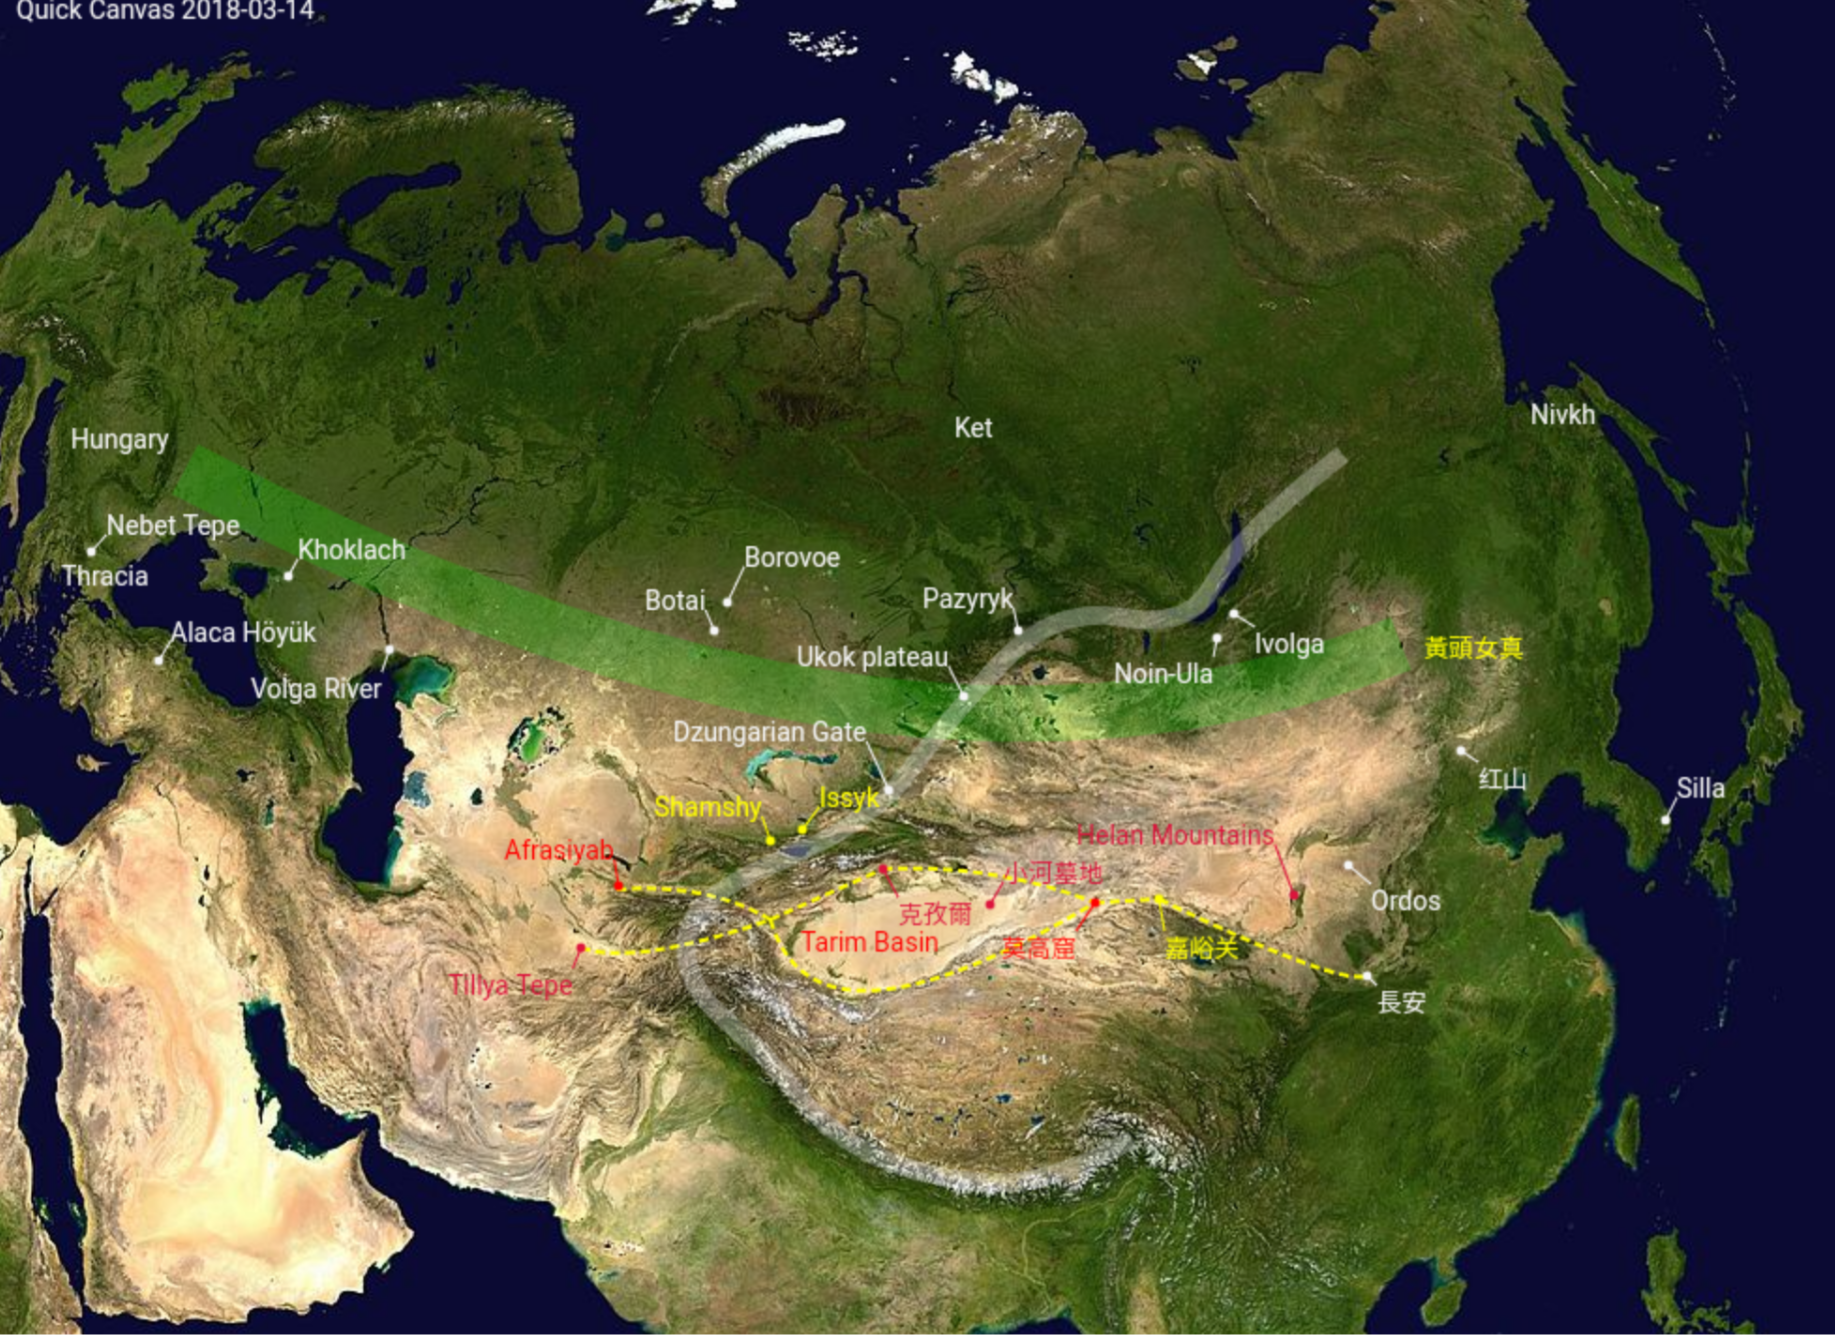  Steppe Route, Silk Road and Eurasian Barrier